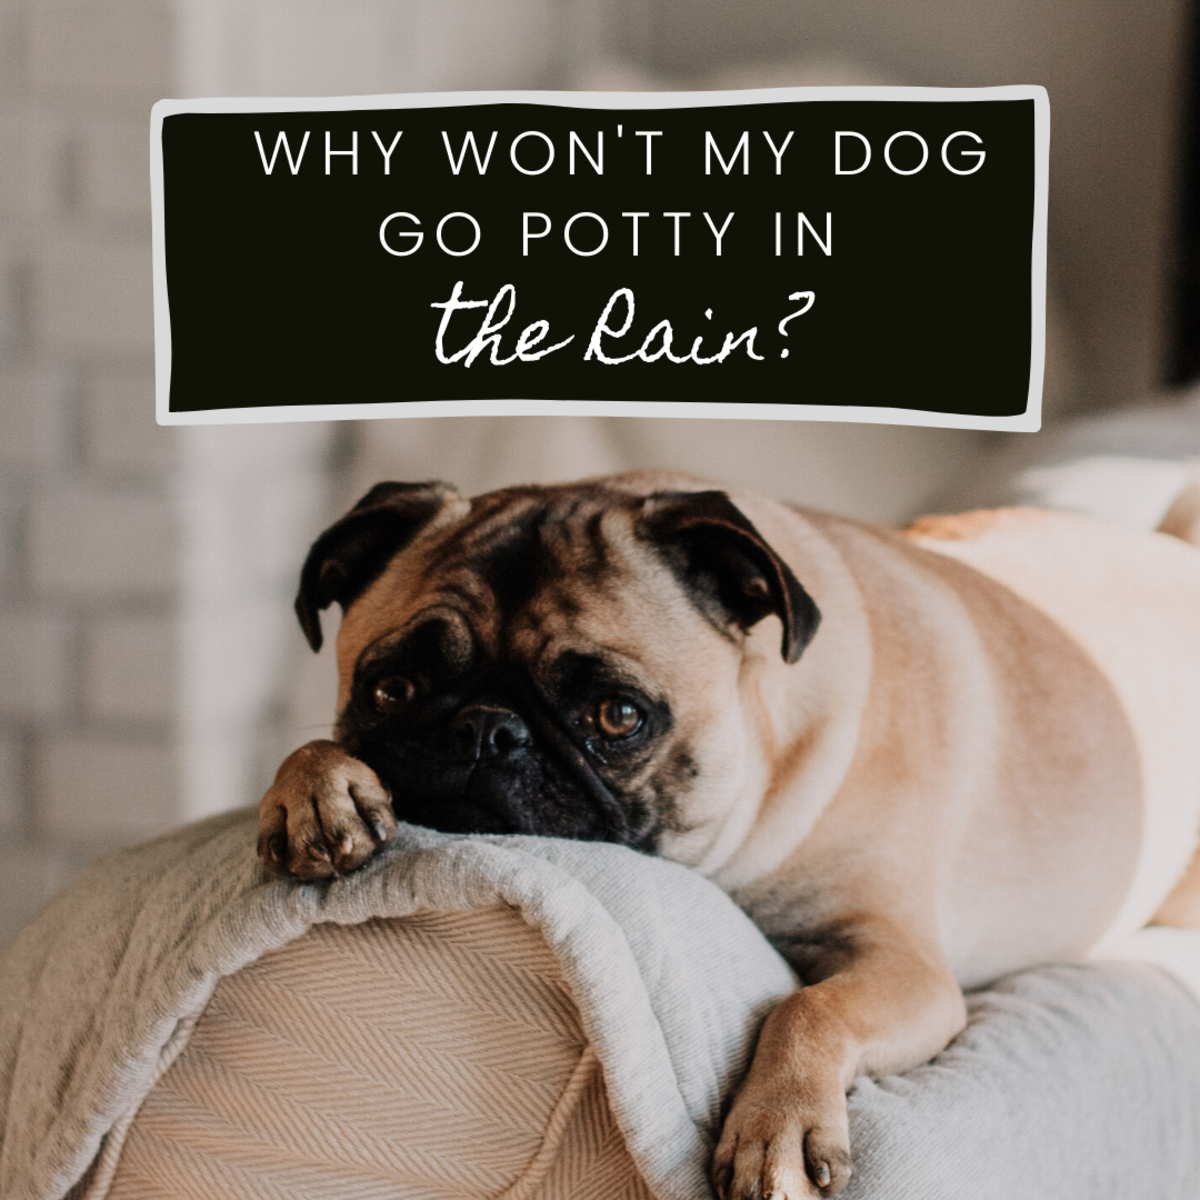 "Rain rain, go away or I will poop and pee another day"—tips for training your dog to potty in wet weather.